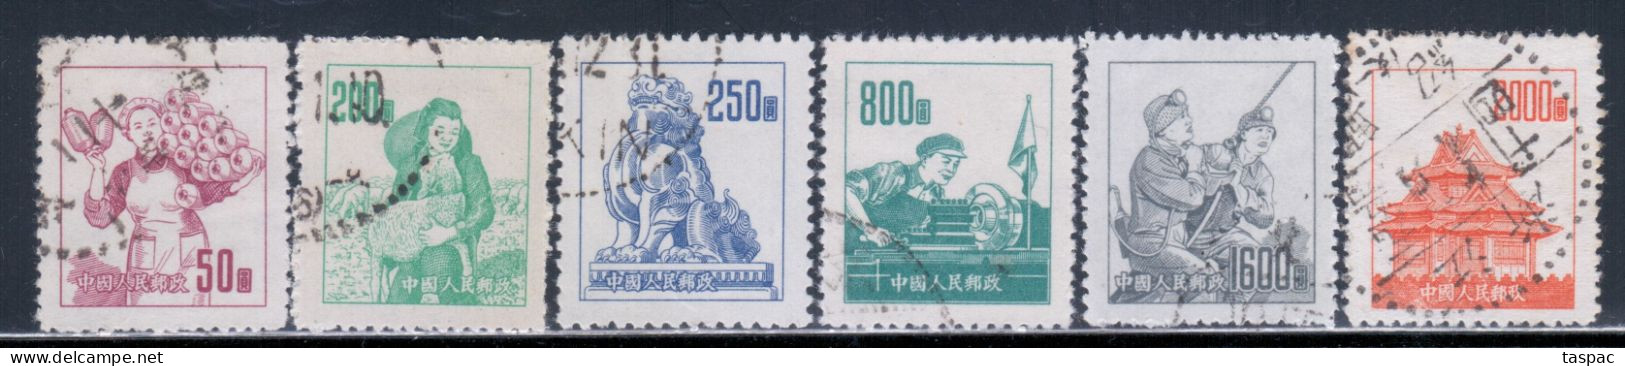 China P.R. 1953 Mi# 202-207 Used - Definitives / Scenes From Work Life - Used Stamps